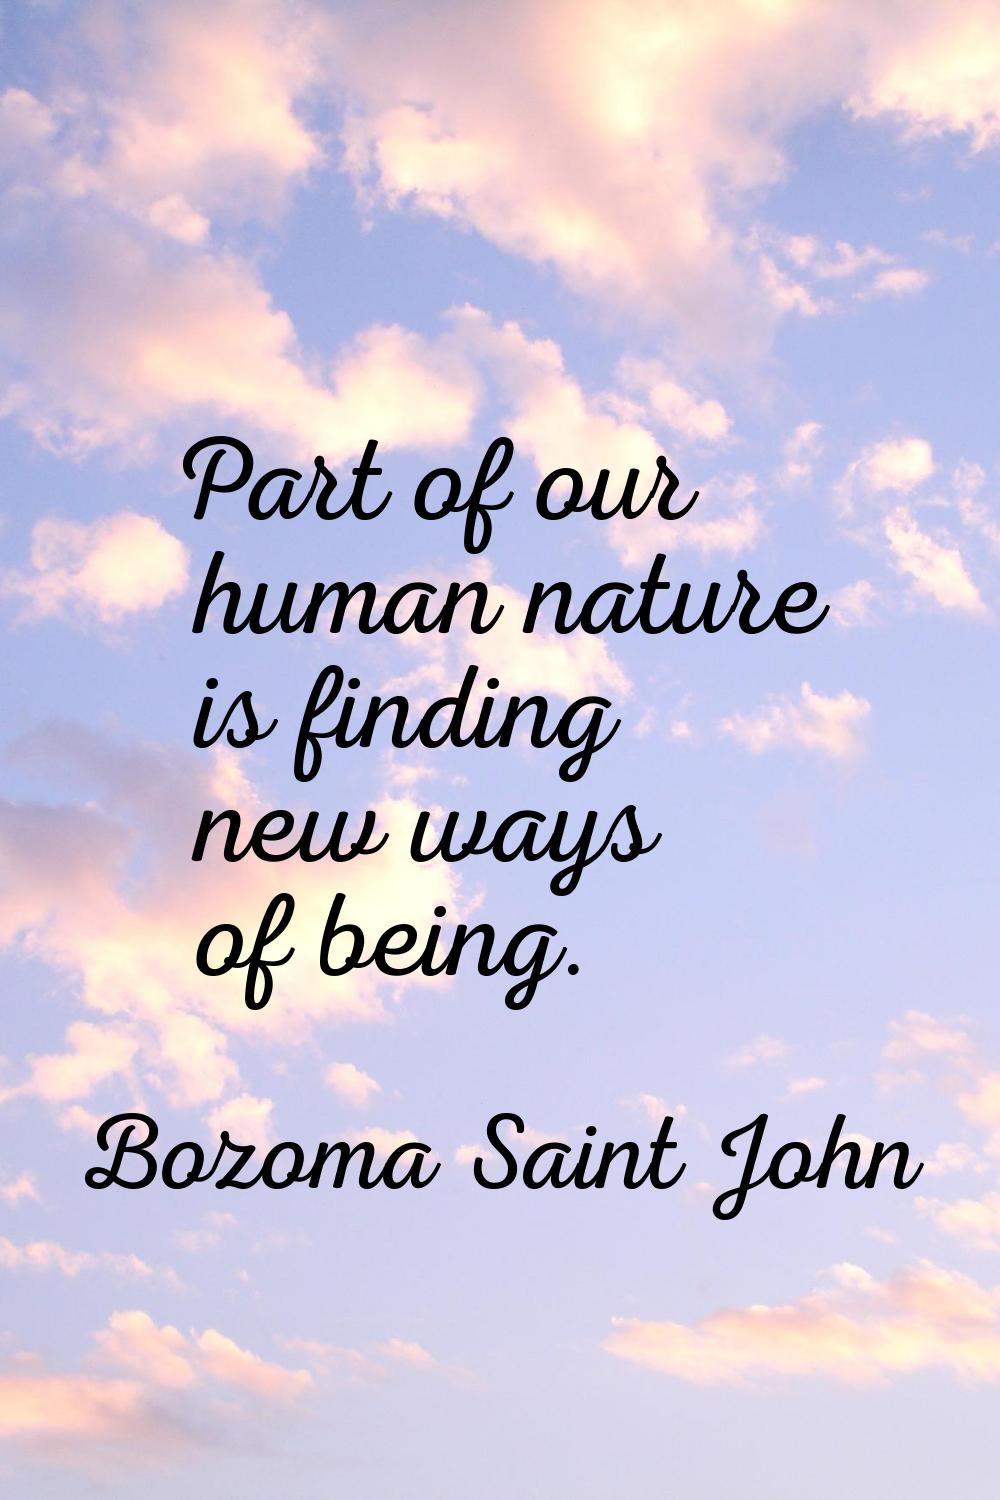 Part of our human nature is finding new ways of being.